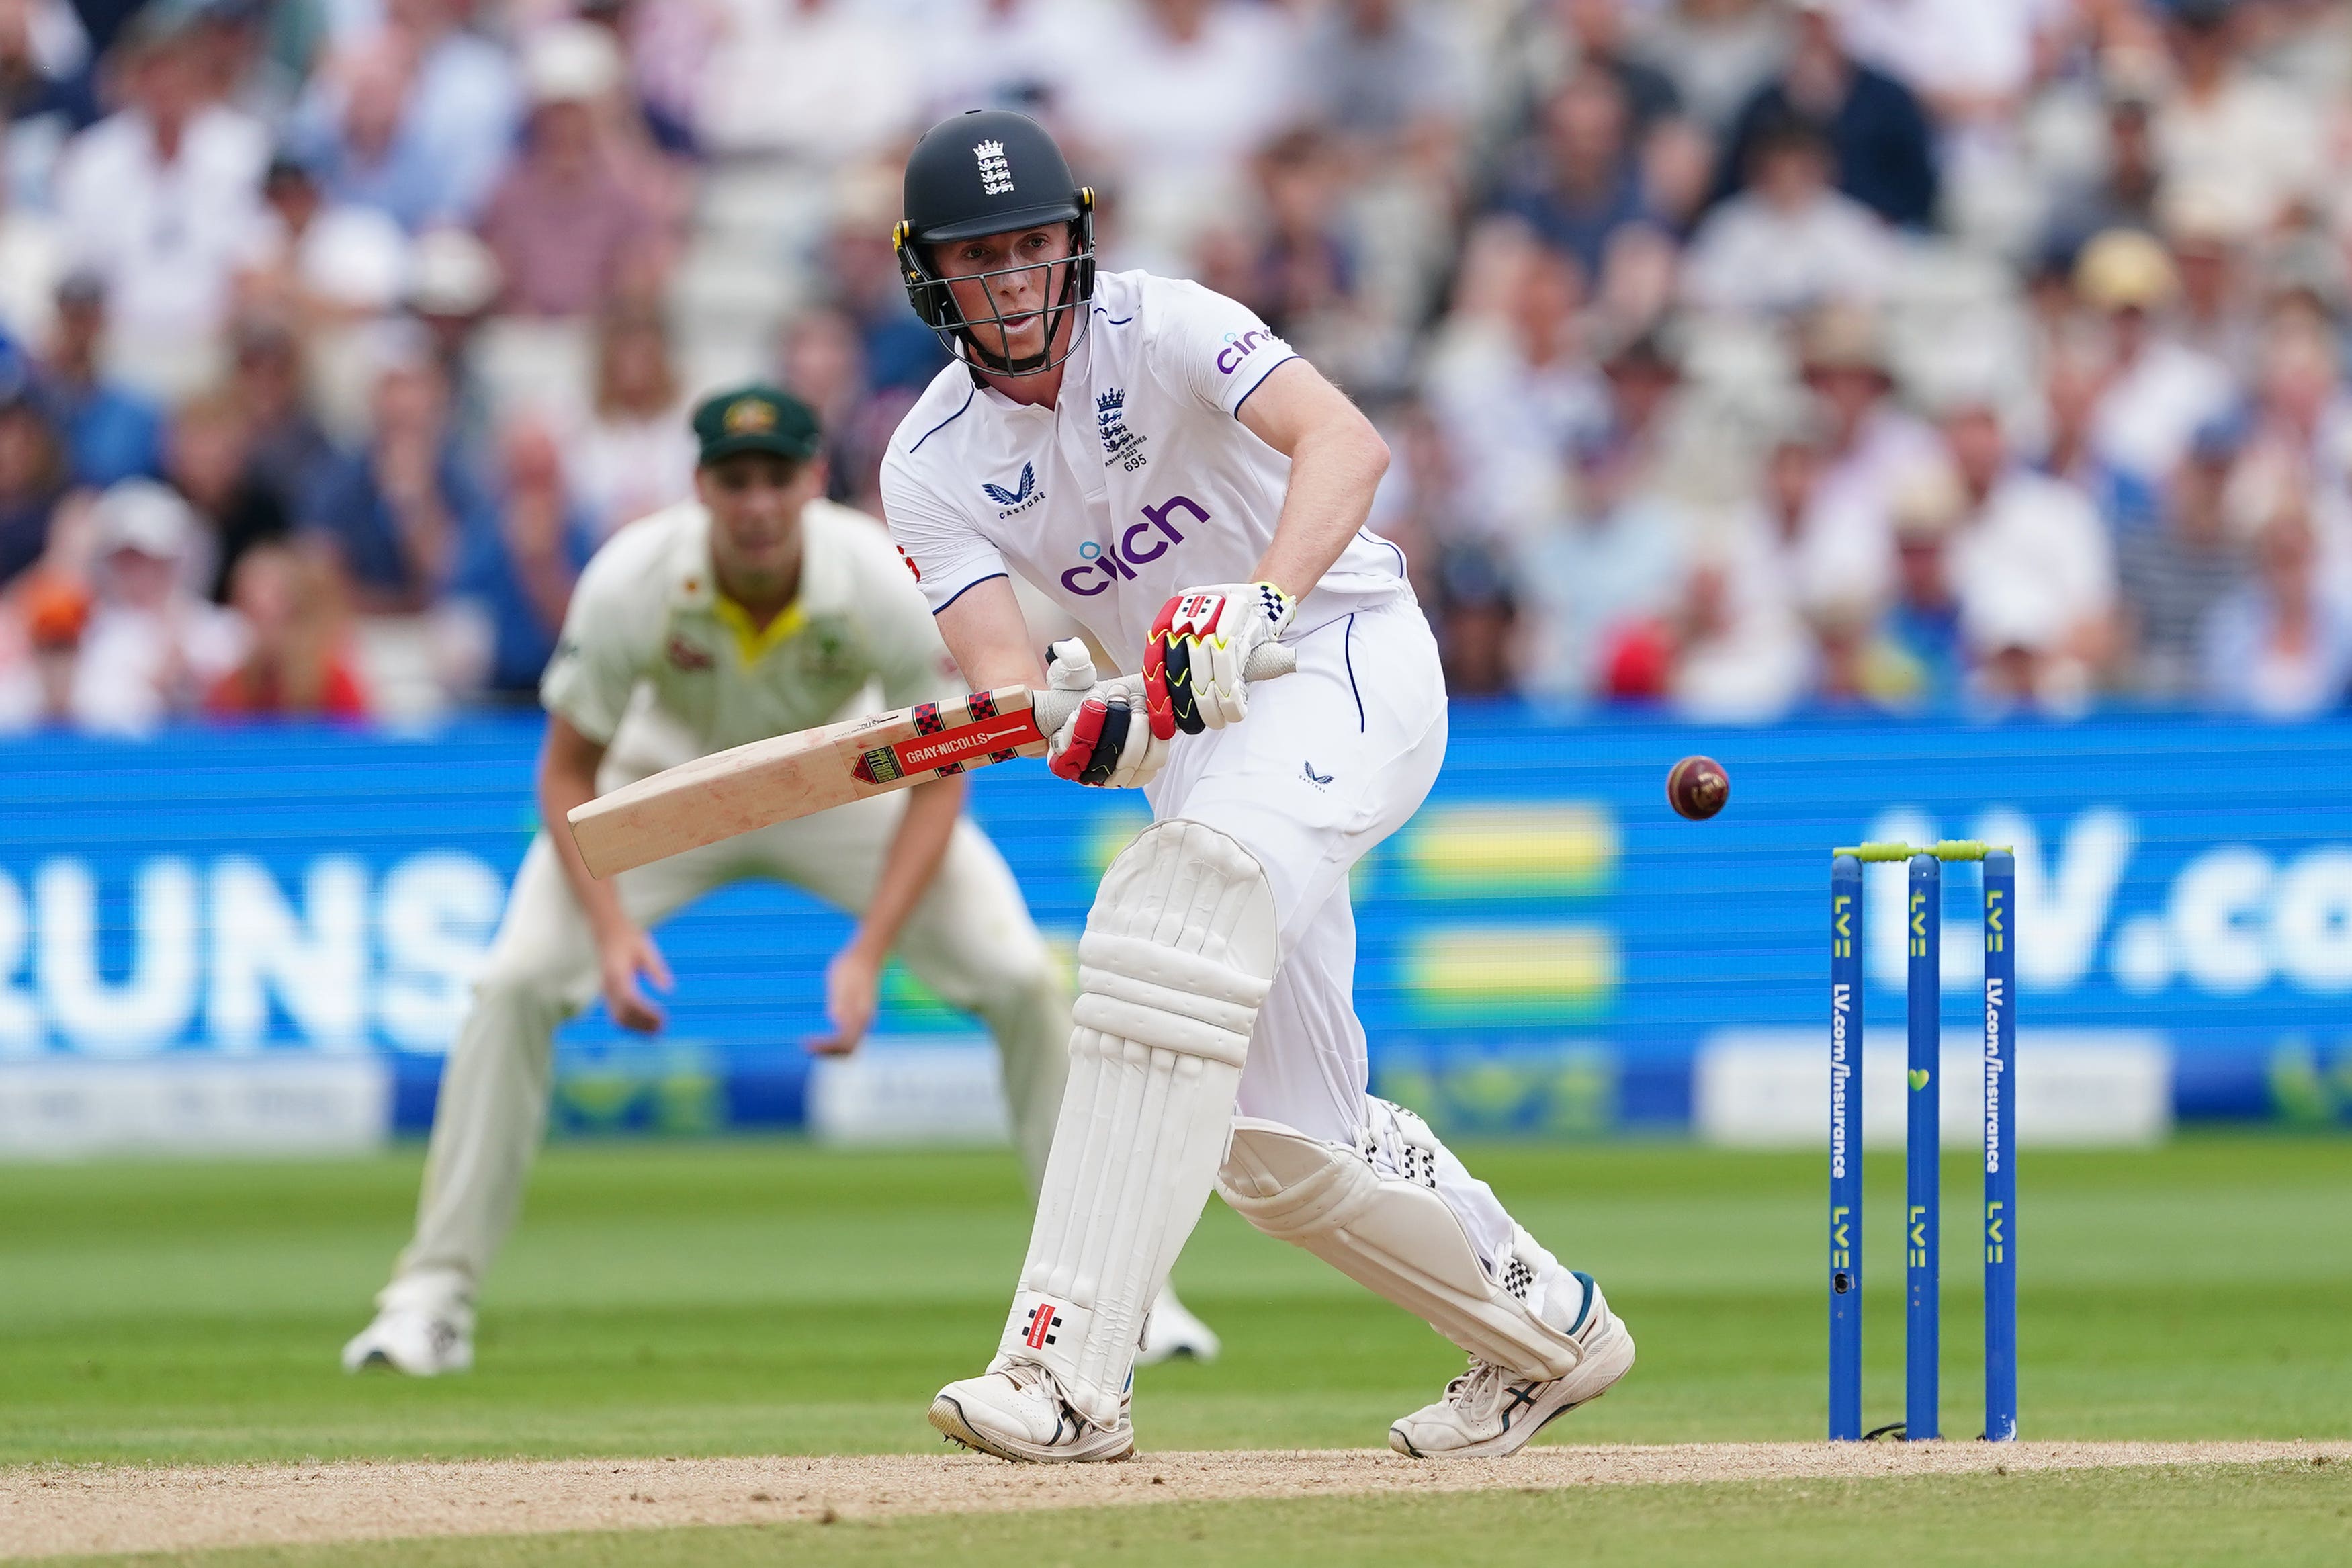 Zak Crawley in batting action during the first Ashes test match at Edgbaston (Mike Egerton/PA)